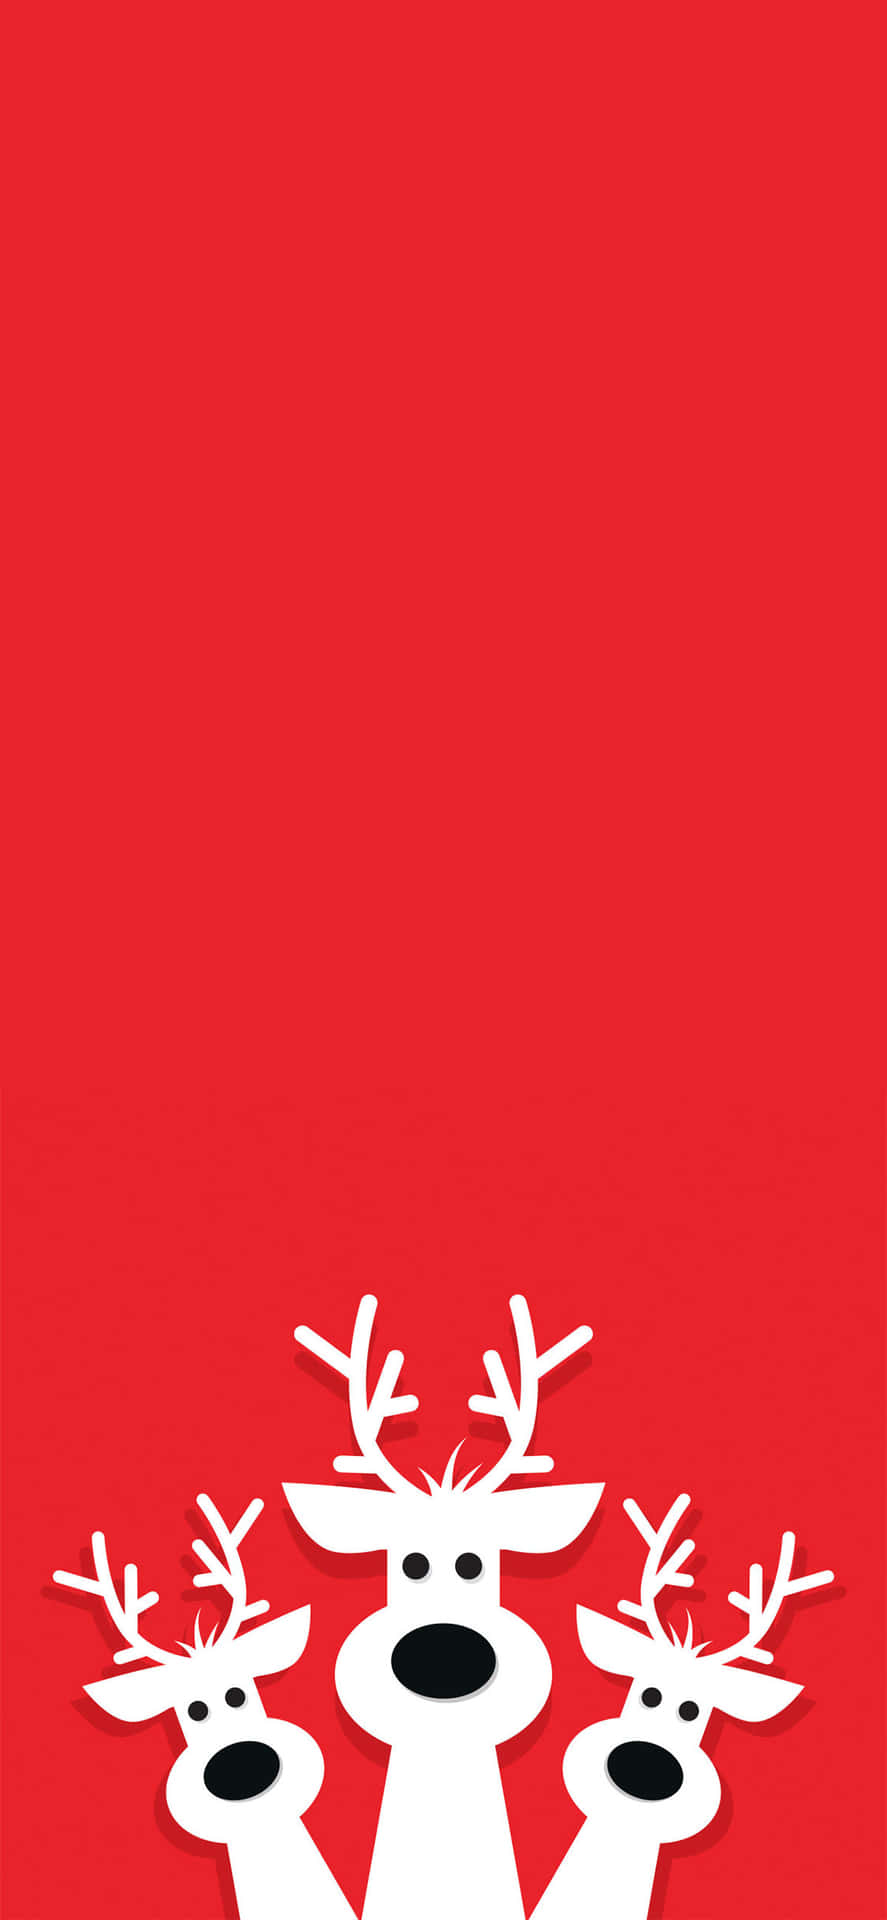 Celebrate the Holidays with this red Christmas iPhone Wallpaper